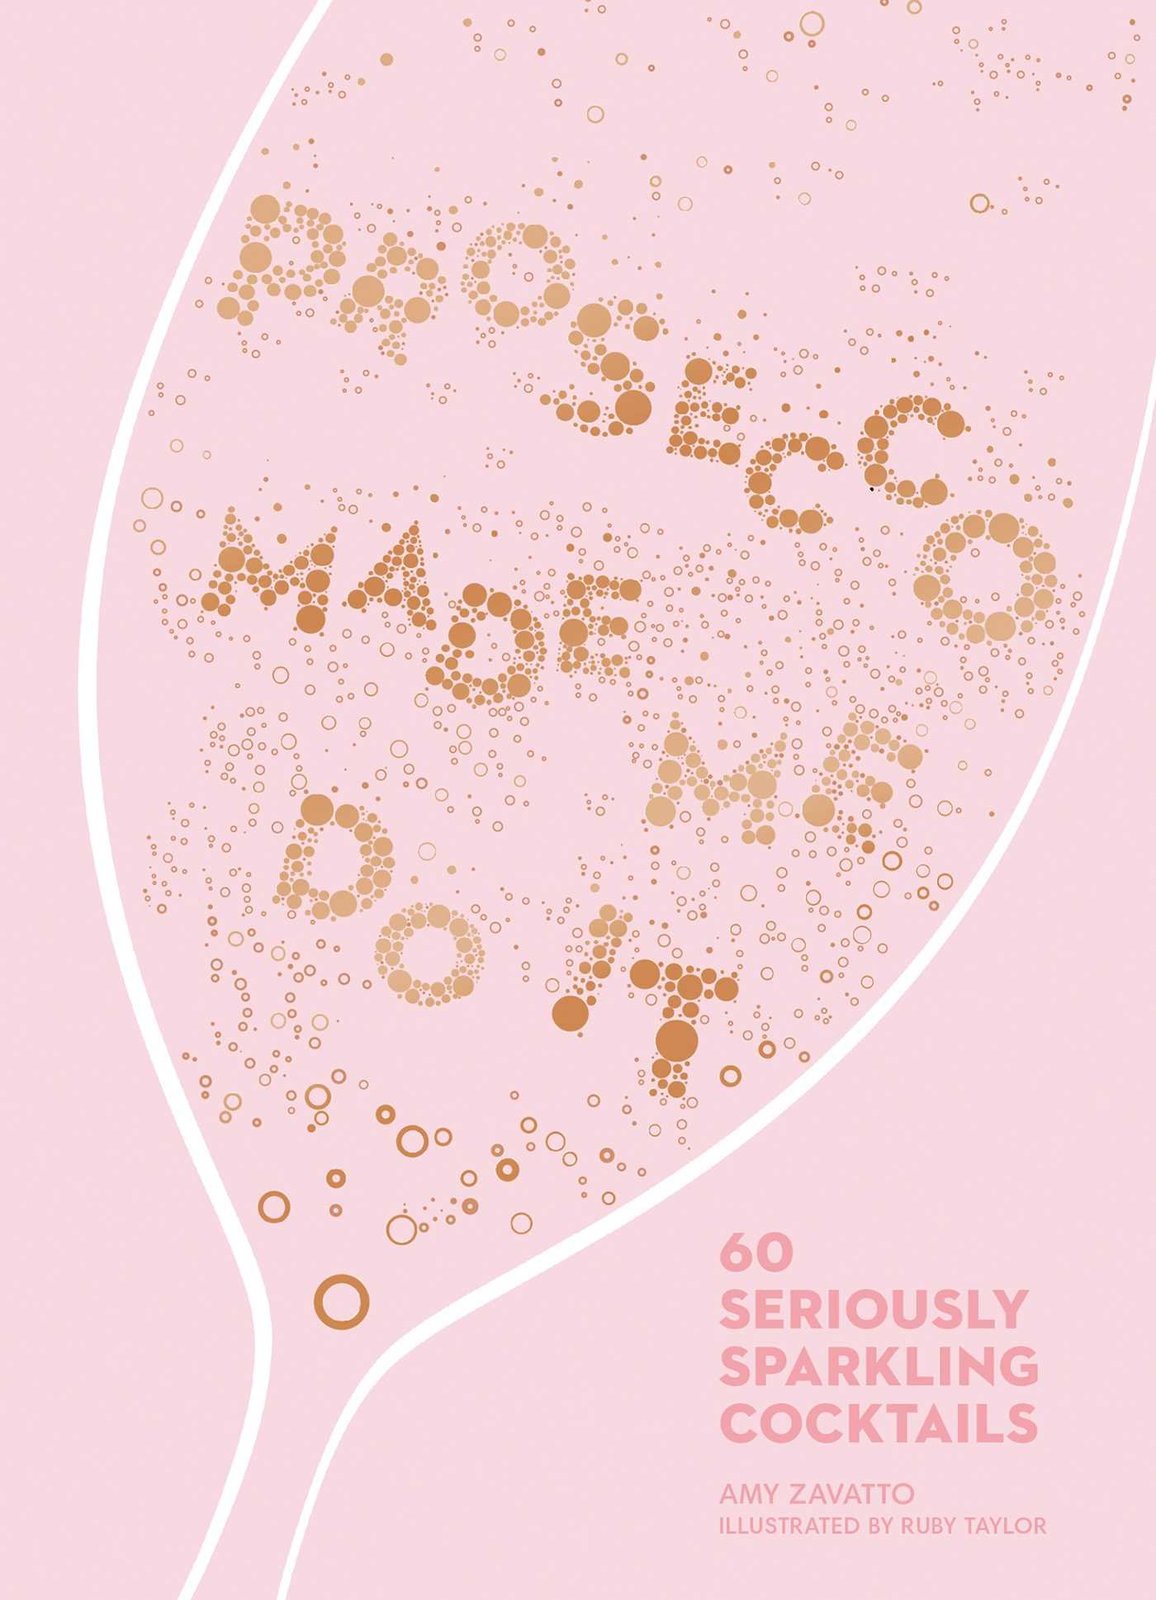 Primary image for Prosecco Made Me Do It: 60 Seriously Sparkling Cocktails [Hardcover] Zavatto, Am